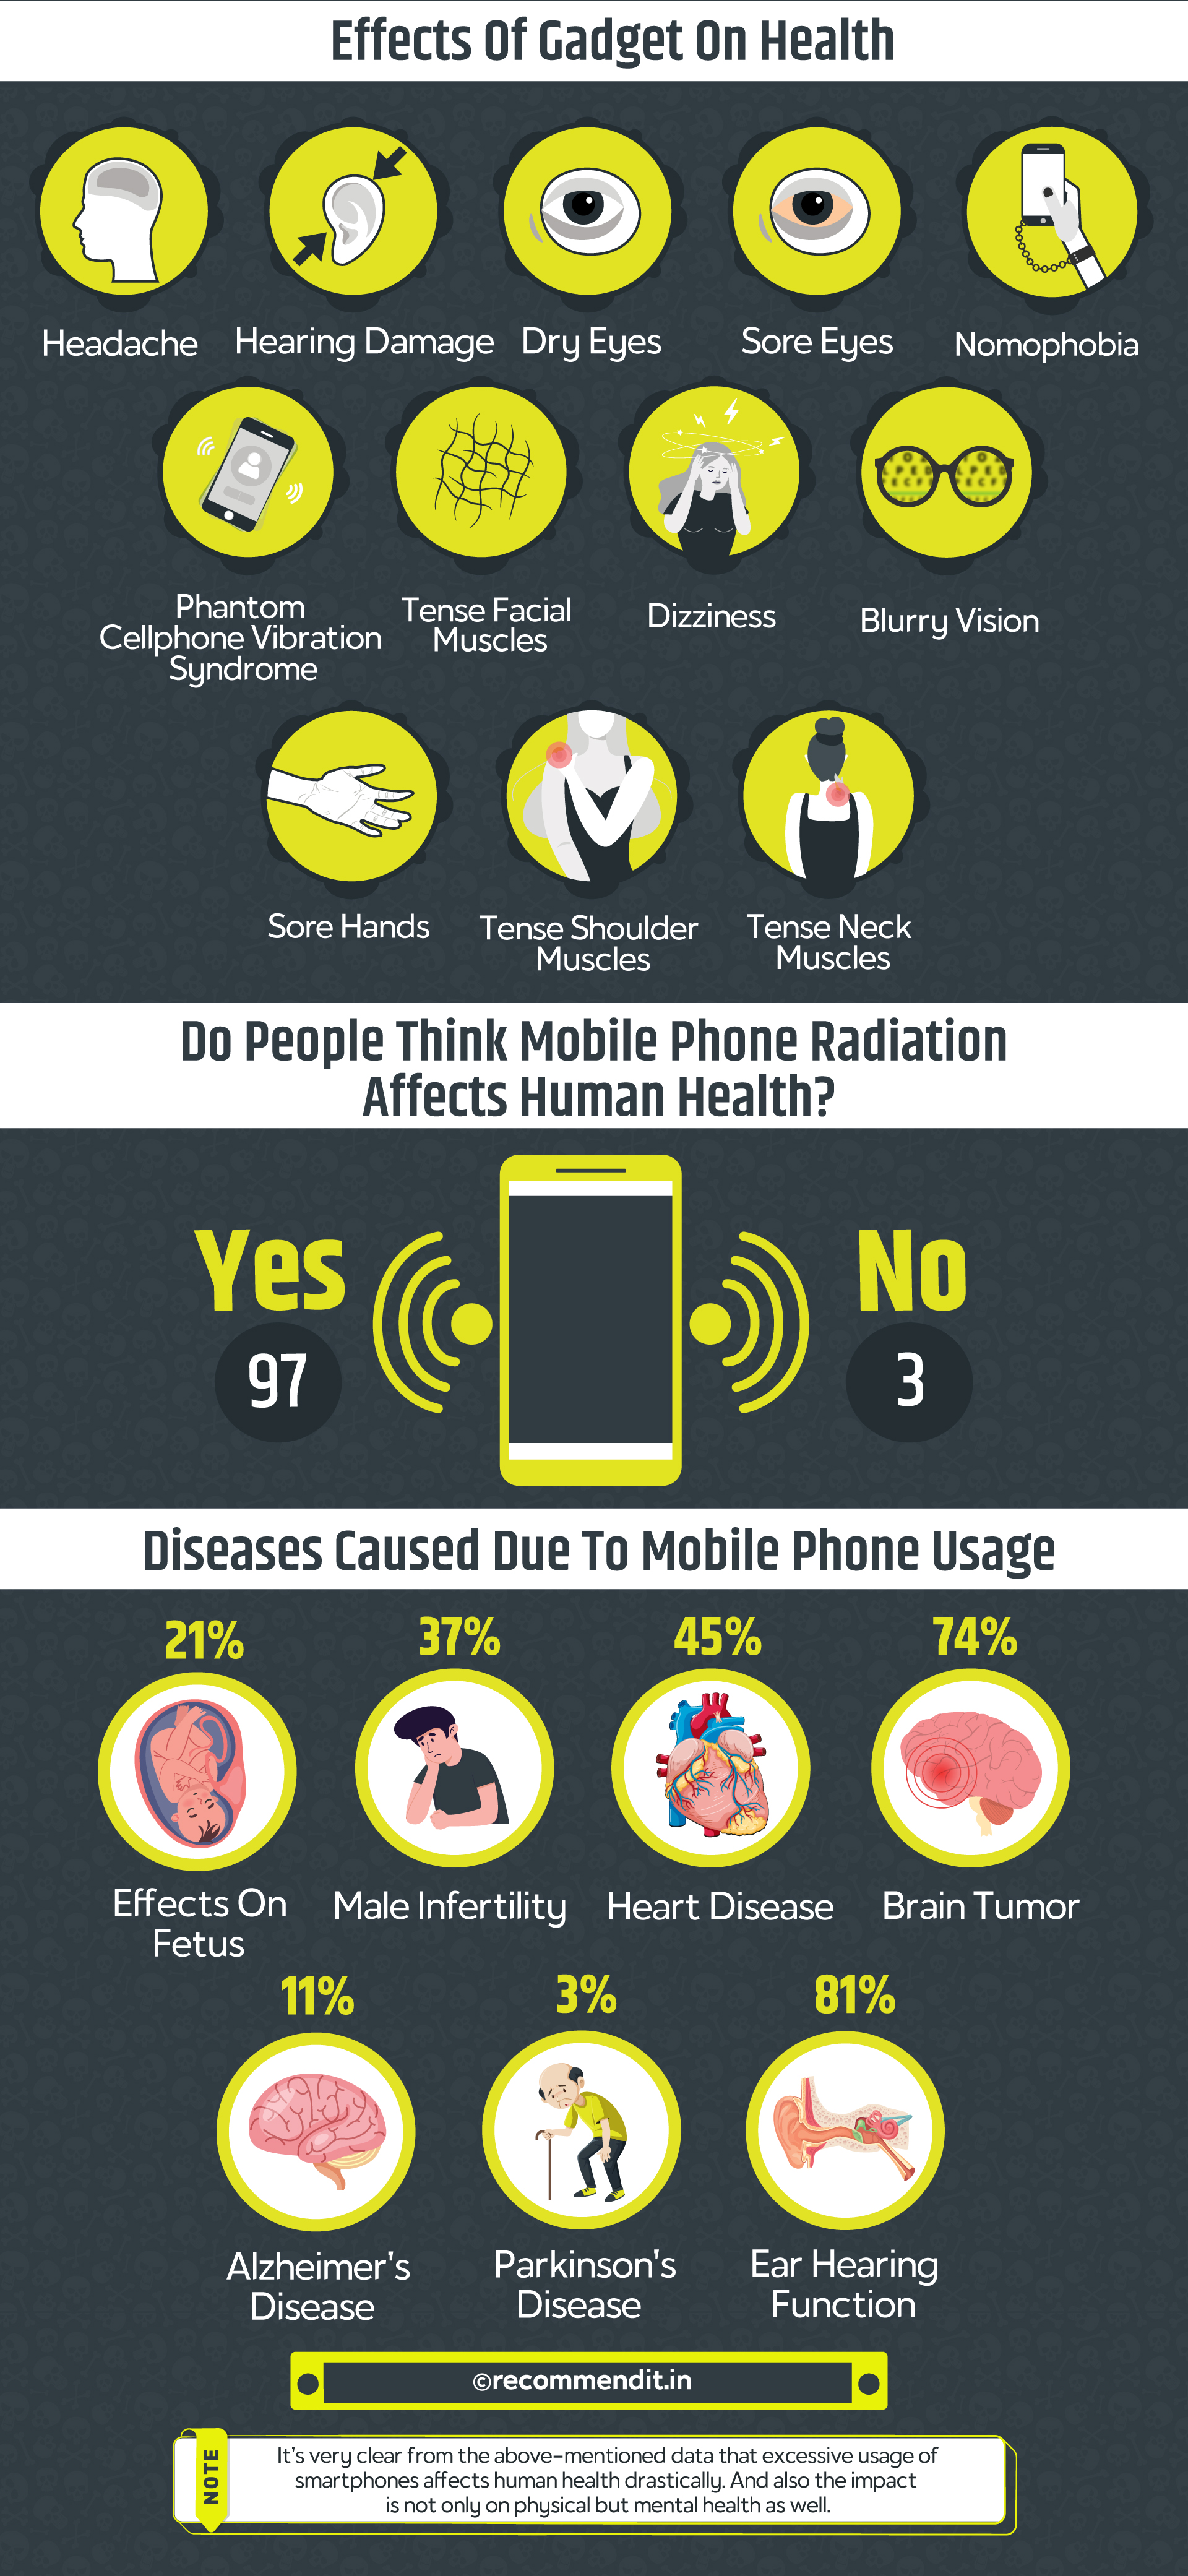 Impact Of Gadgets On Health